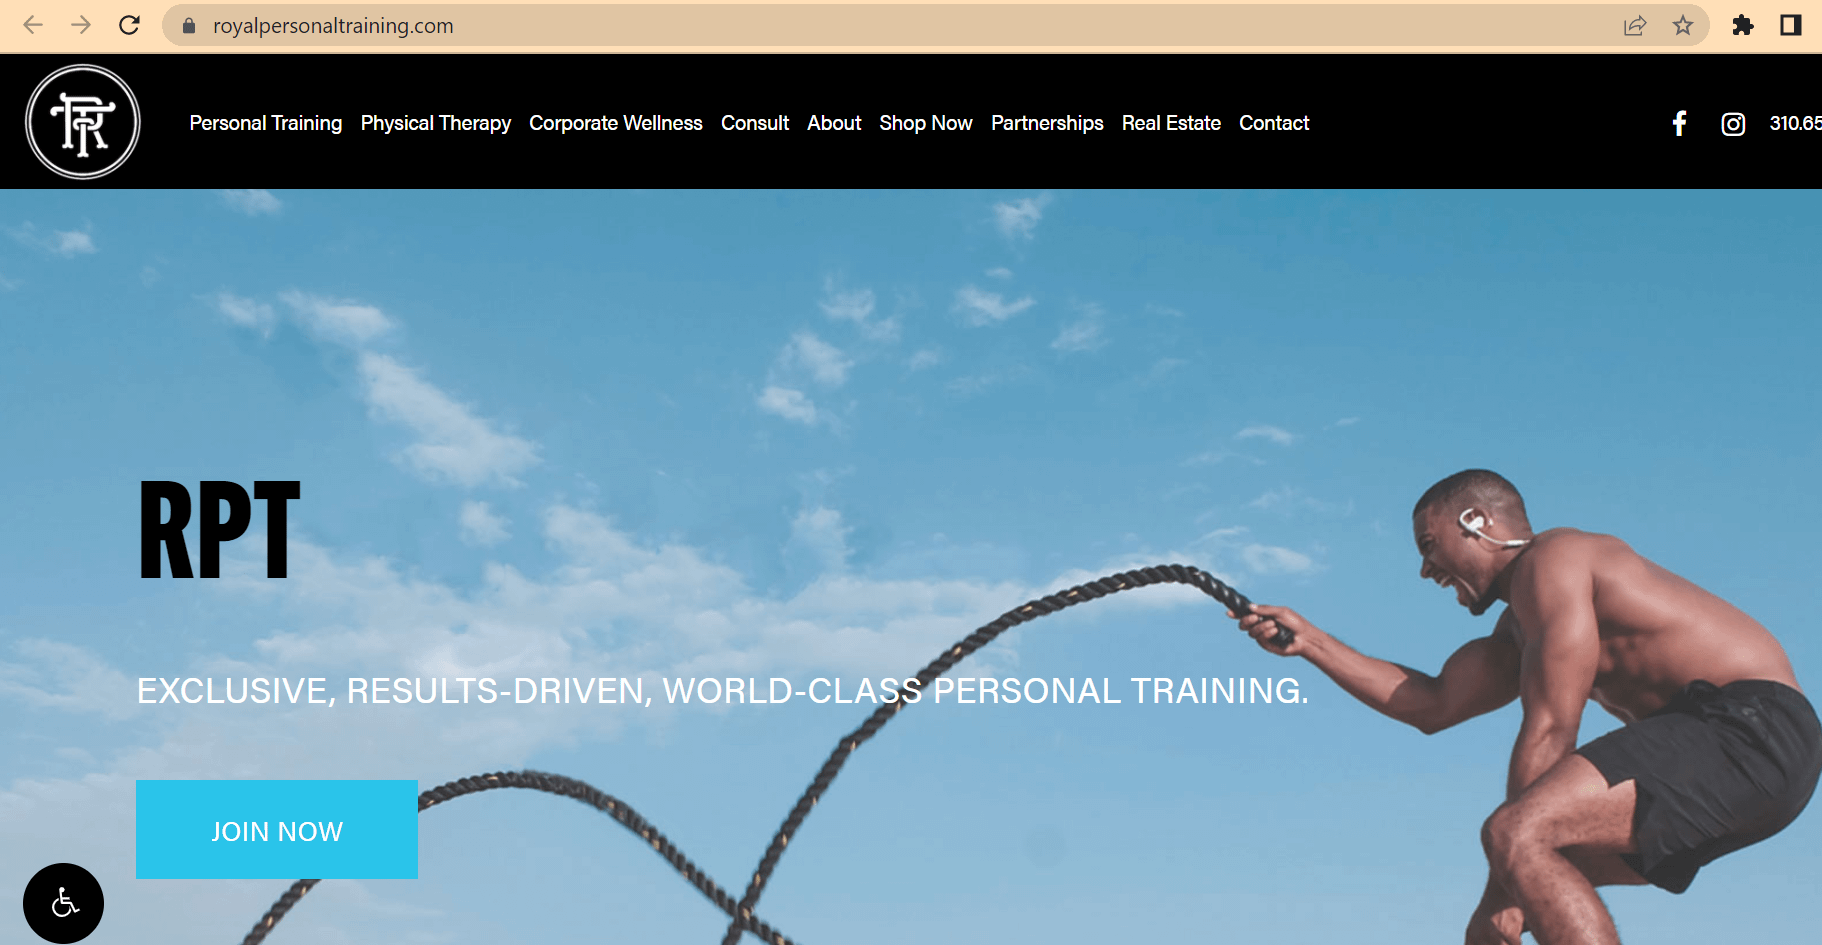 Royal personal training website home page